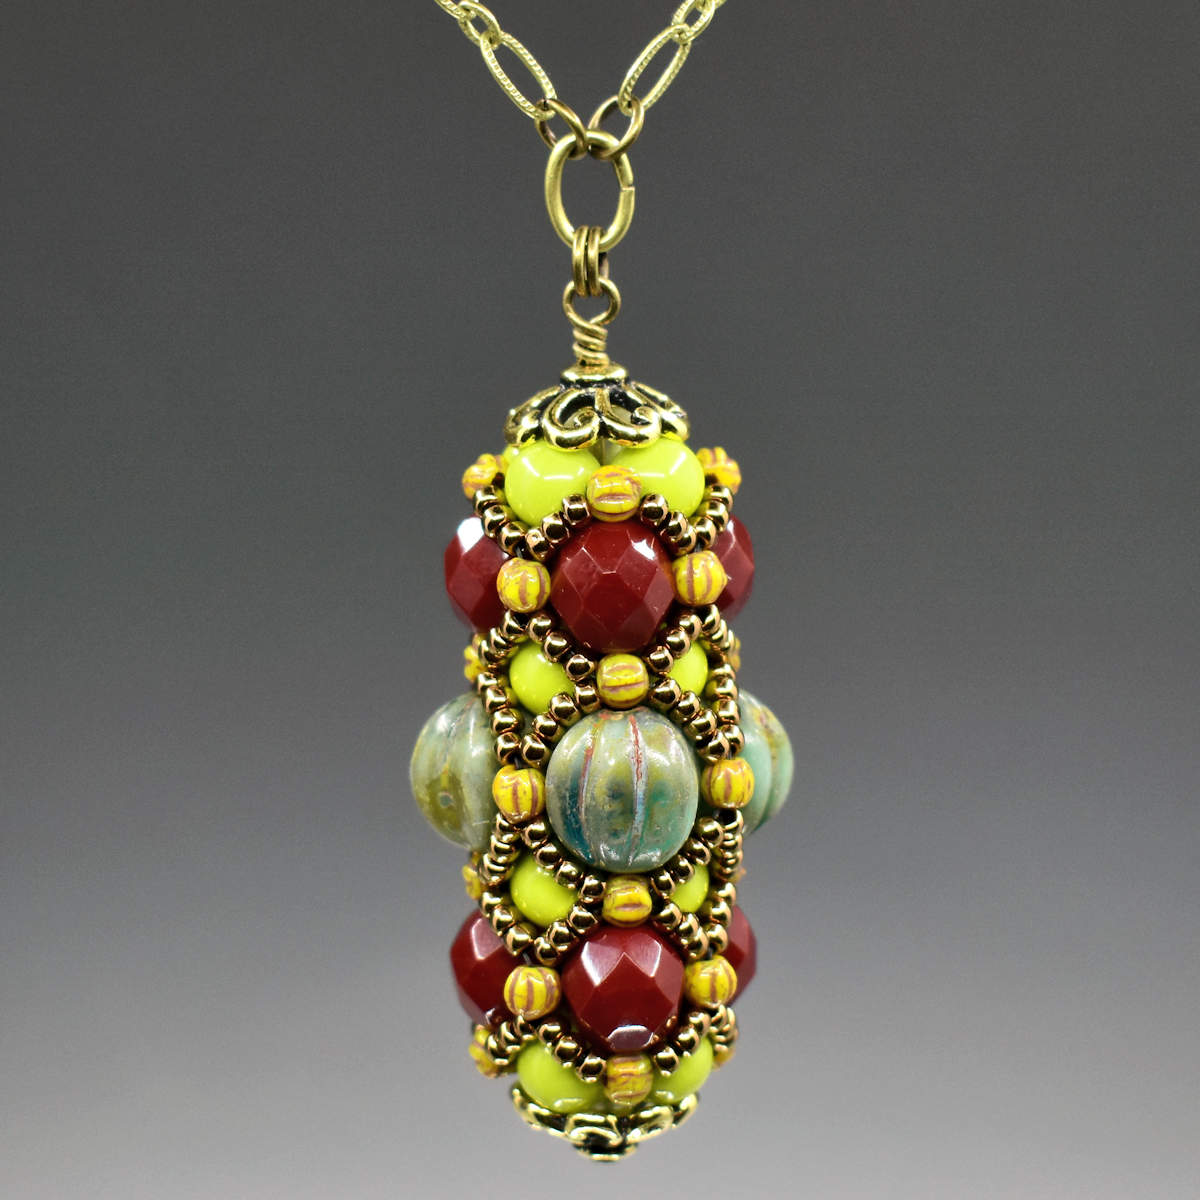 A green and burgundy beaded pendant on a gold colored chain. There is a center row of large mottled turquoise beads for the center row, and burgundy for the outer row.  The chartreuse green beads that form the rest of the base structure show in the spaces between the gold seed bead overlay.